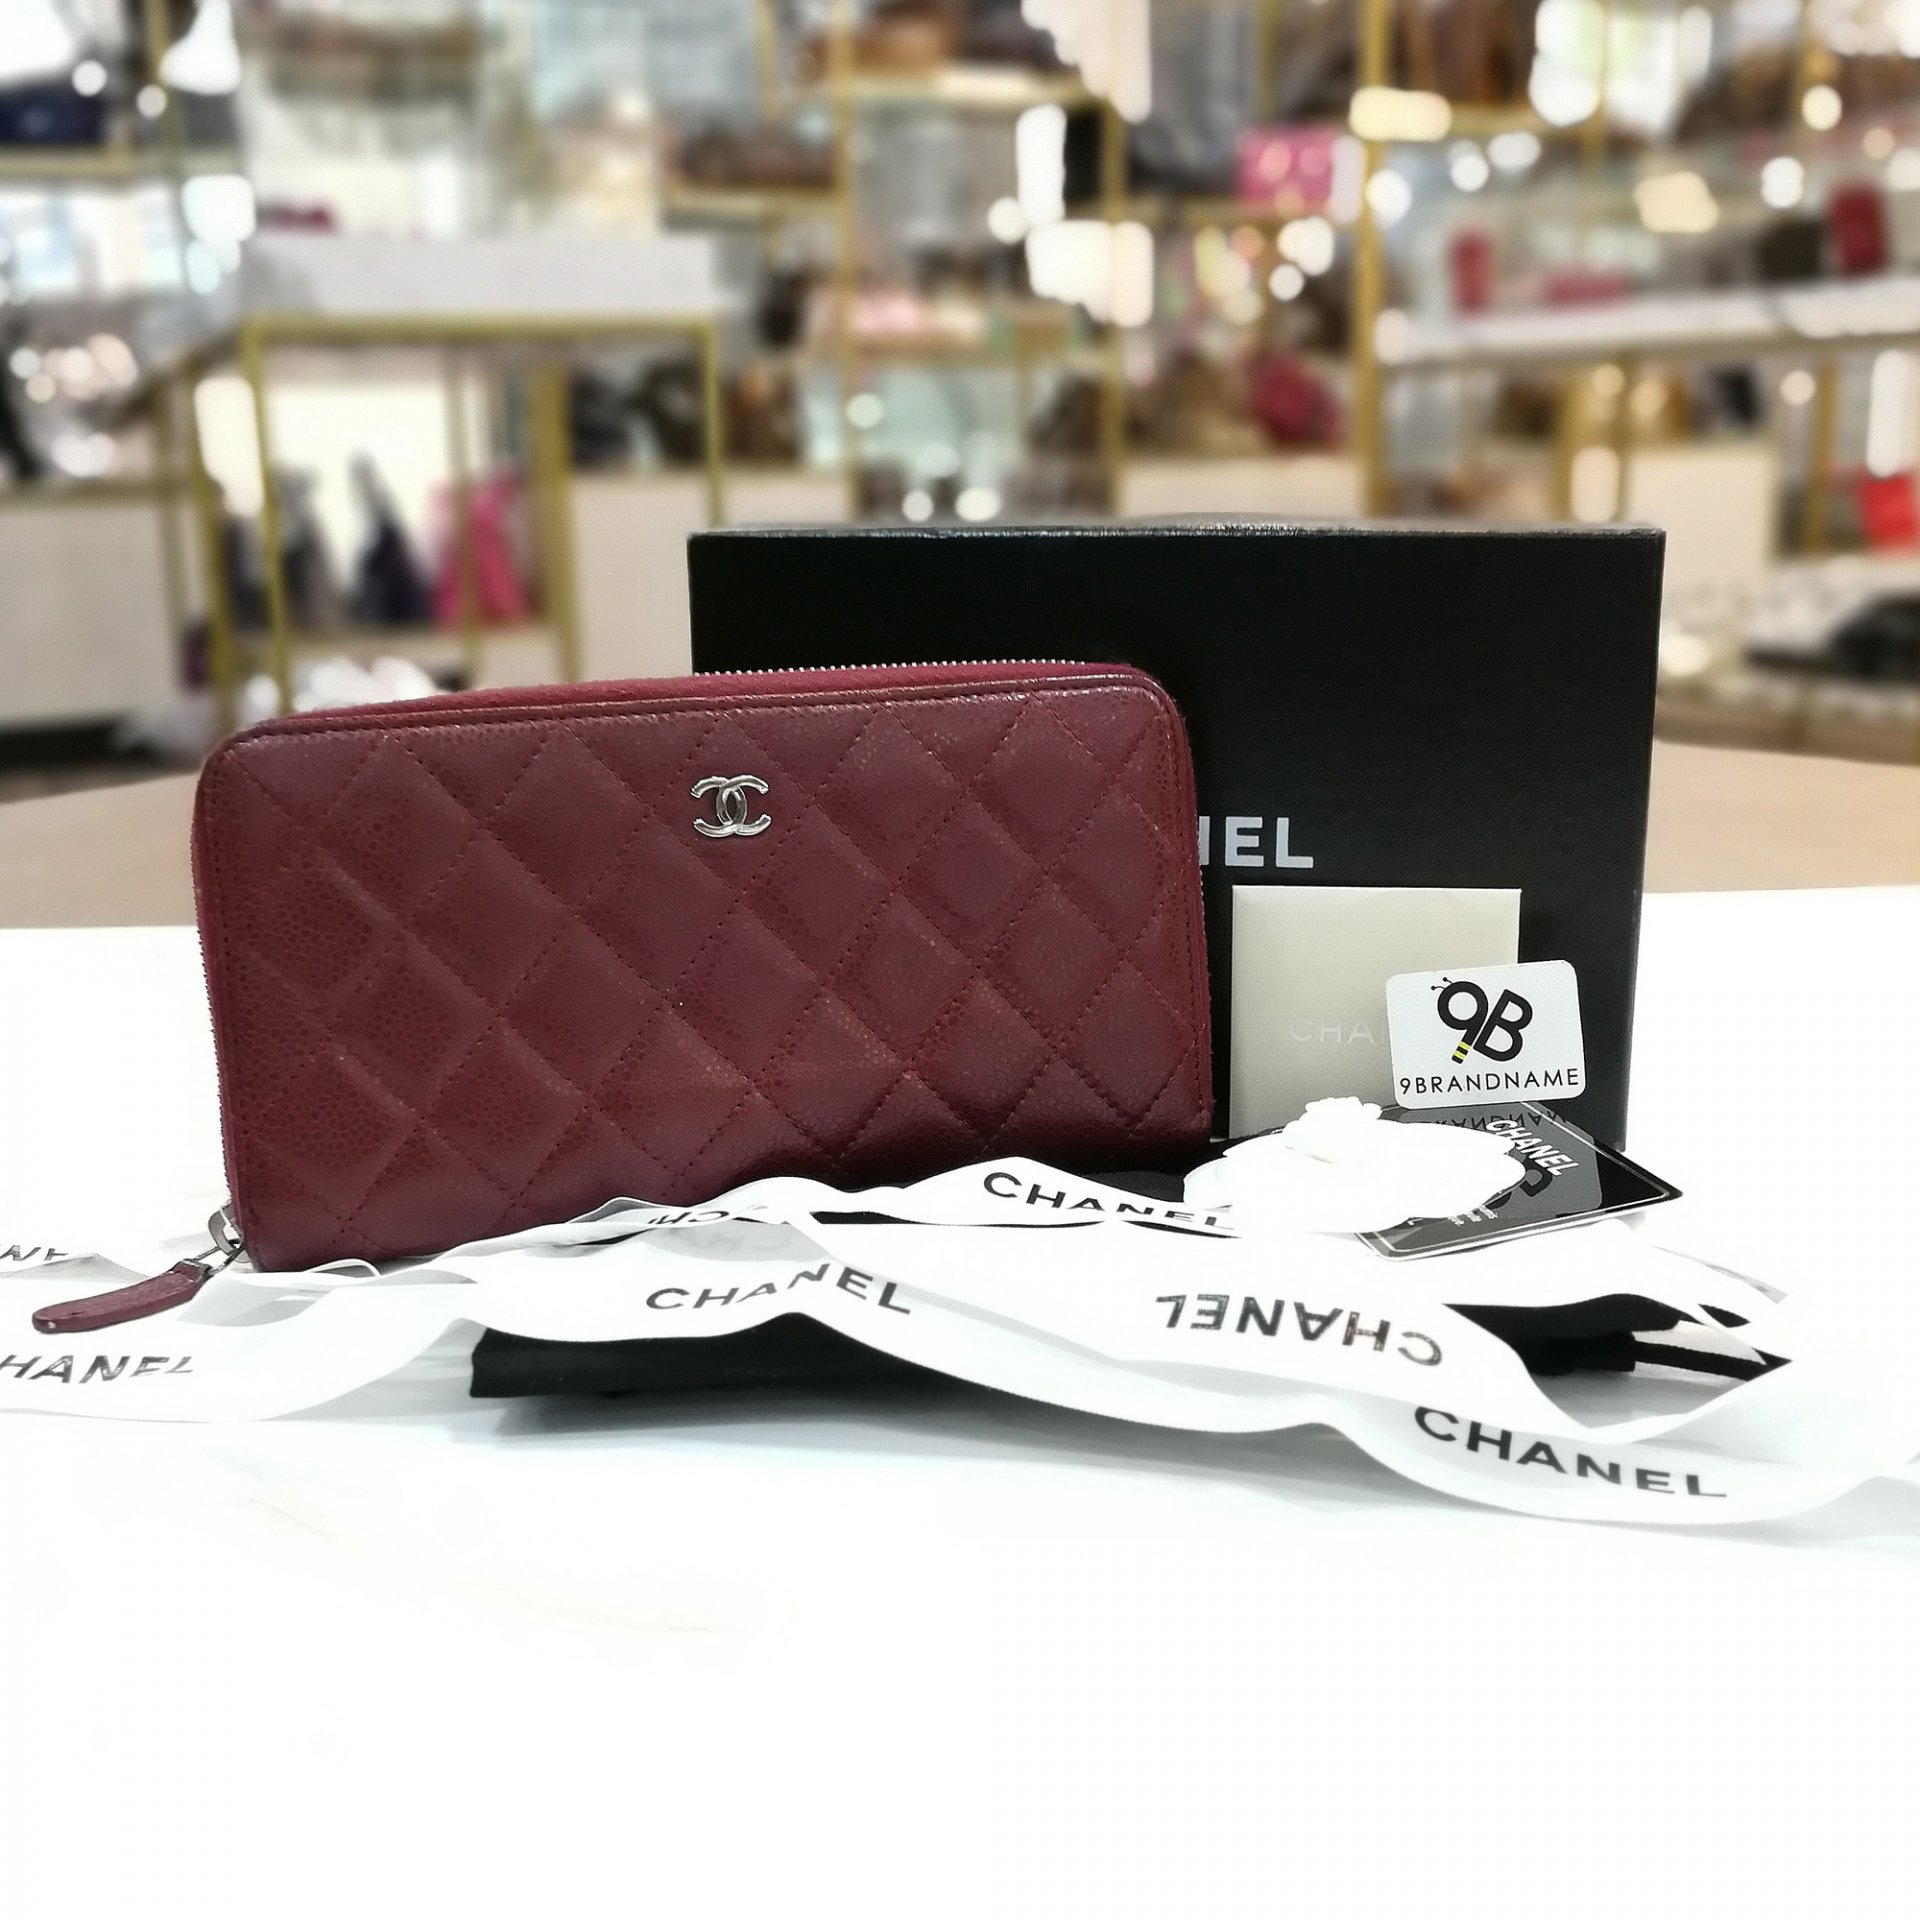 Preloved Chanel Wallet Luxury Bags  Wallets on Carousell